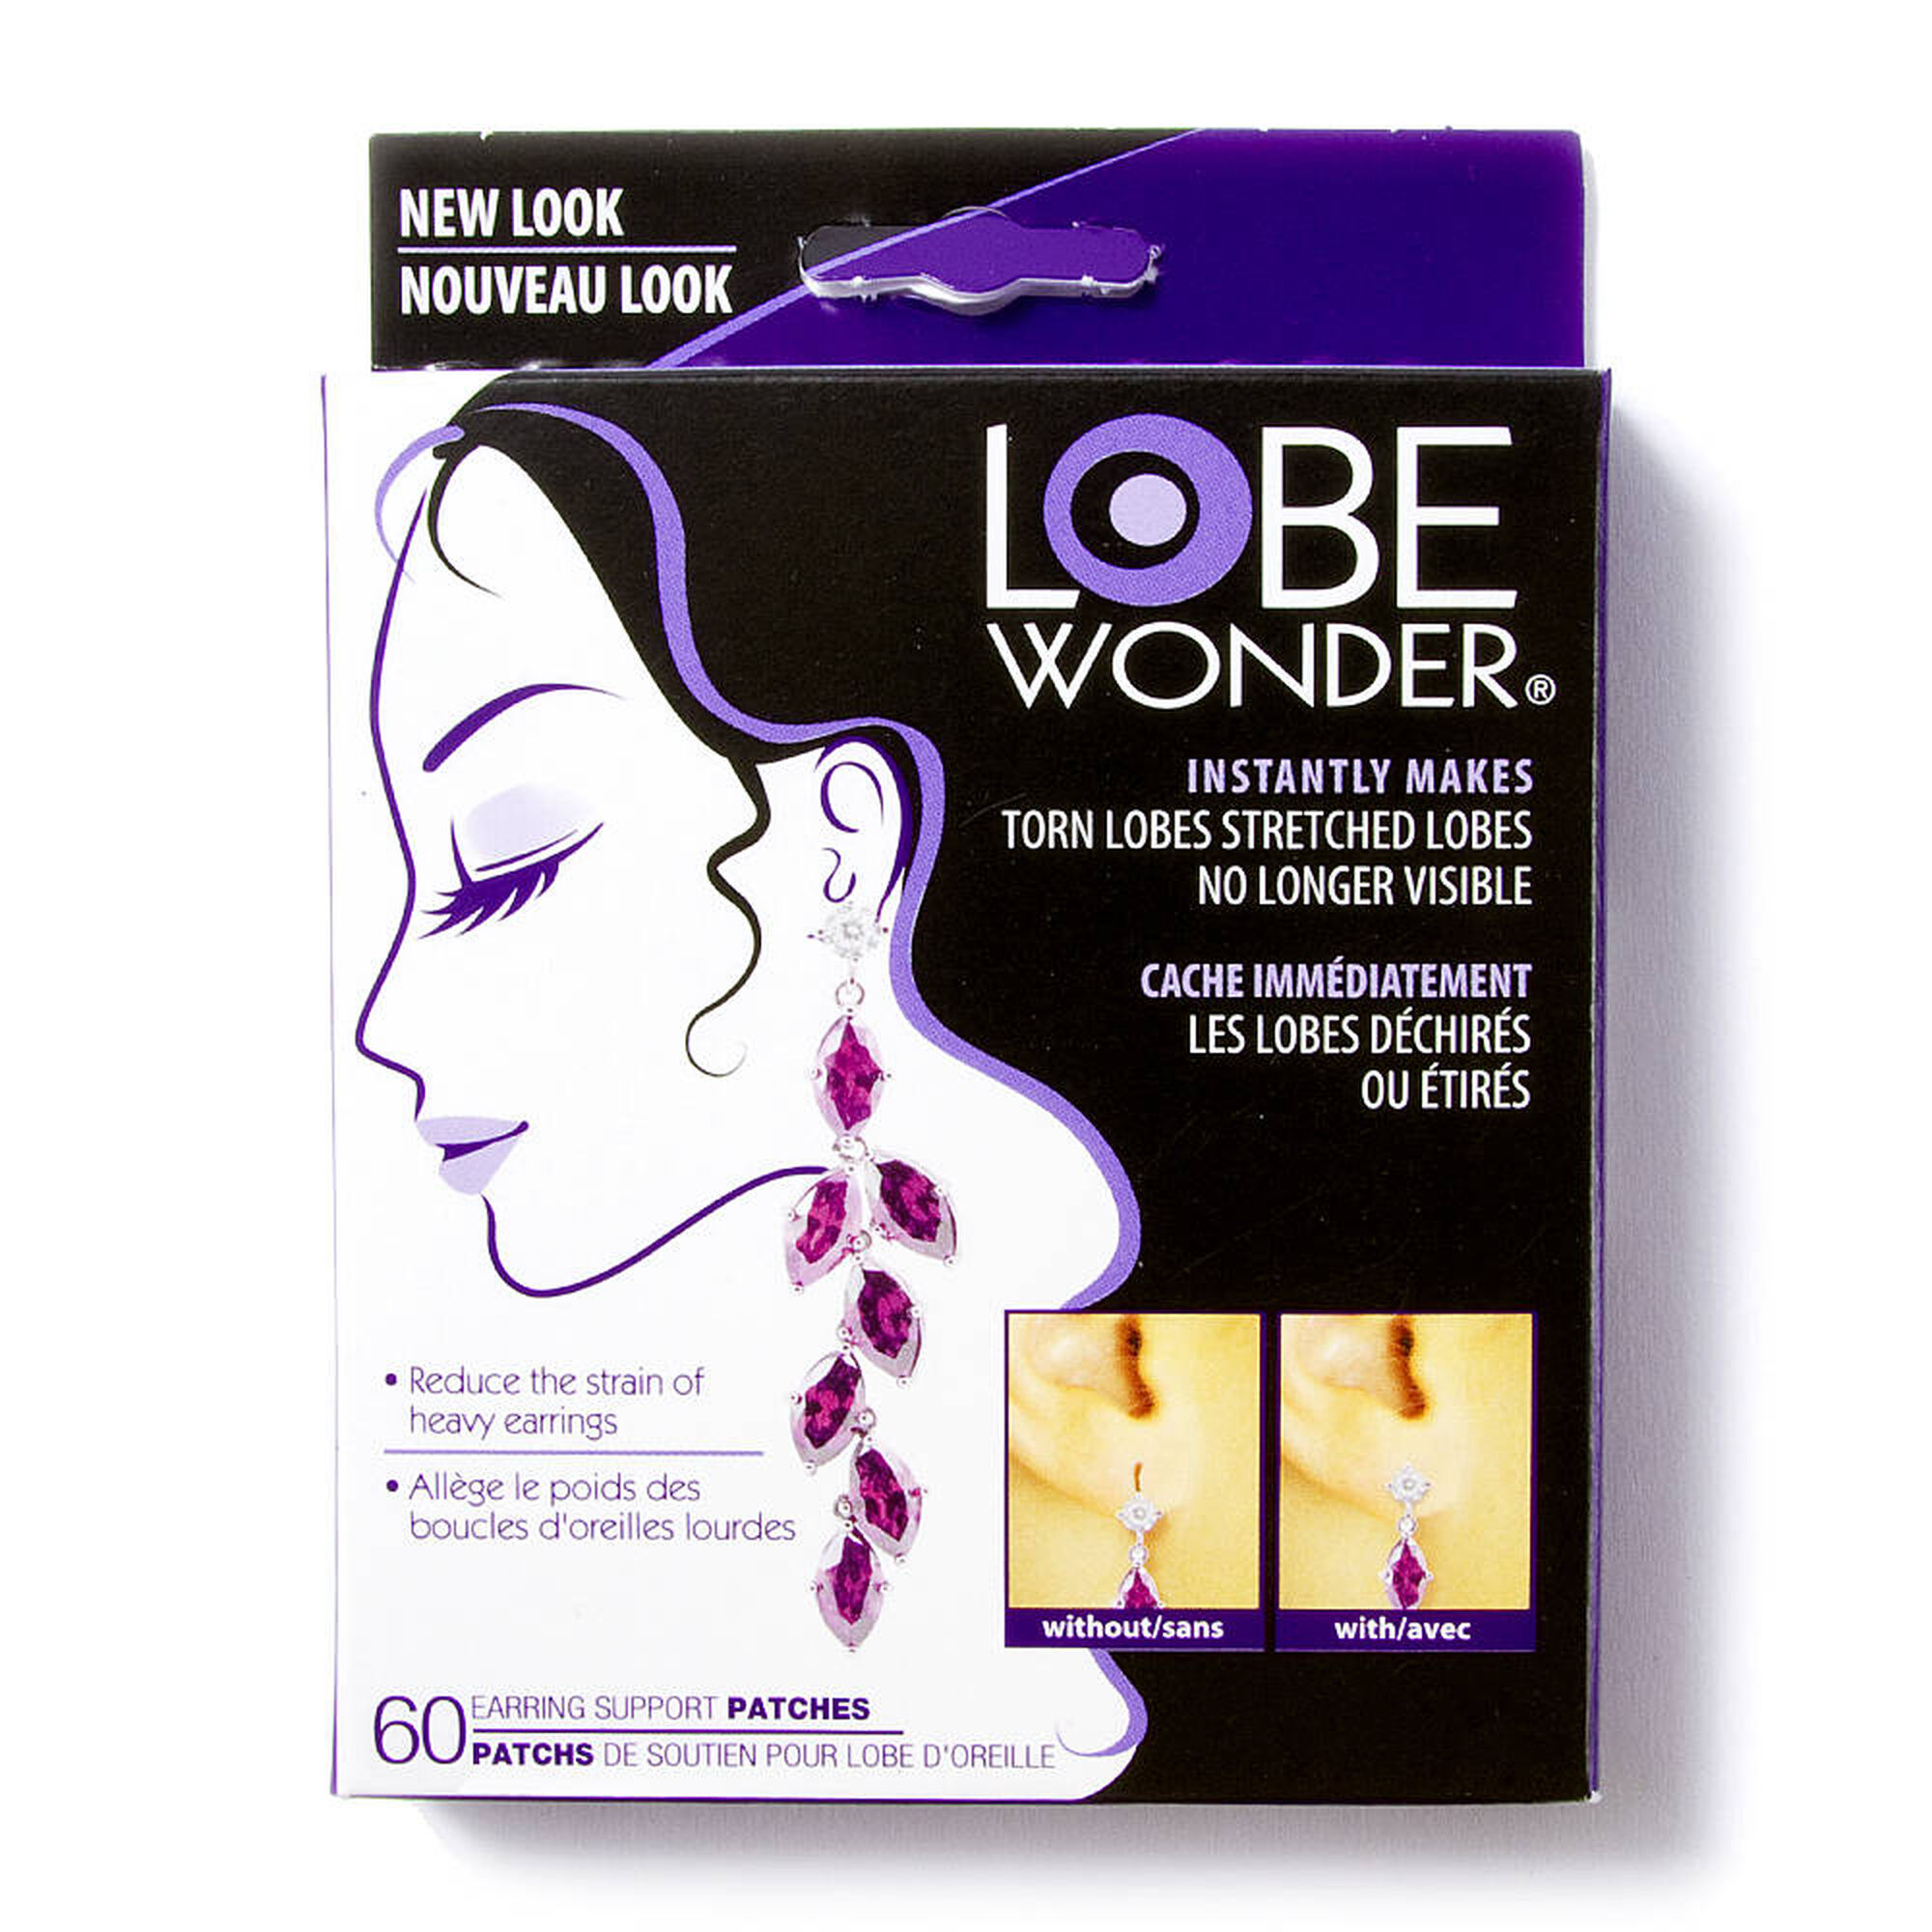 Lobe Wonder is back in stock at - Julwelry Curacao